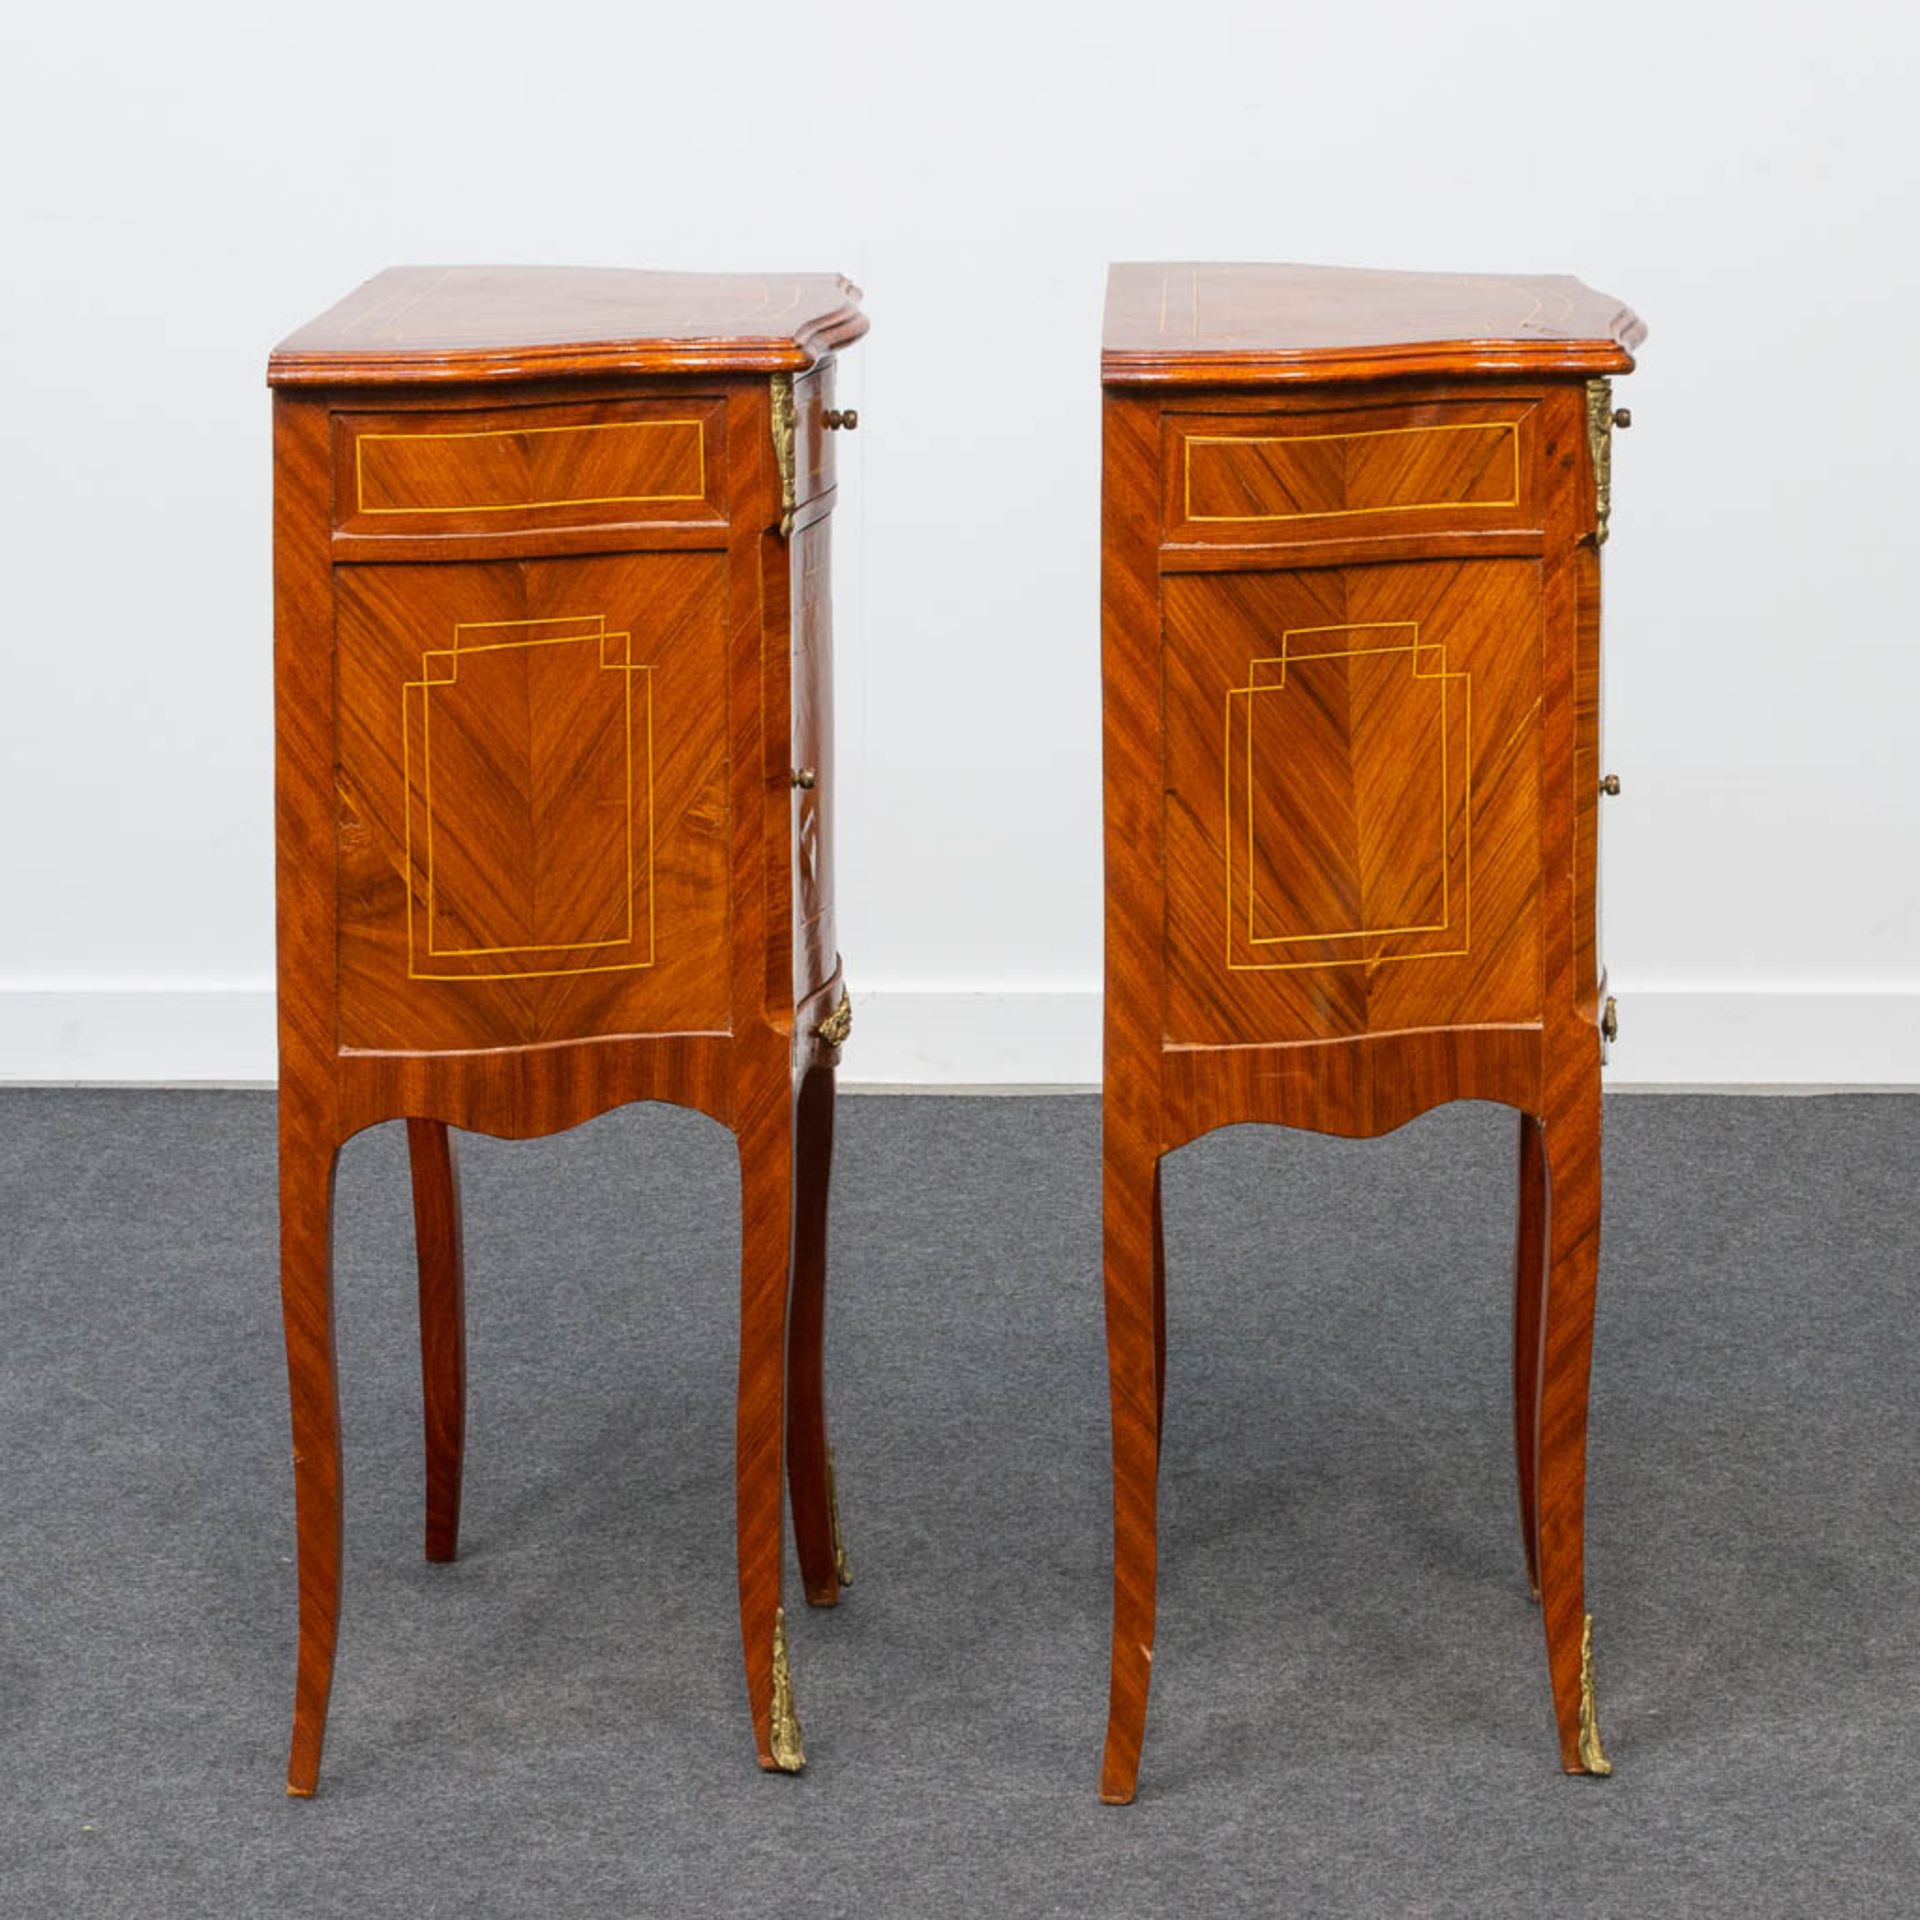 A pair of bronze mounted nightstands, inlaid with marquetry. Second half of the 20th century. - Image 14 of 22